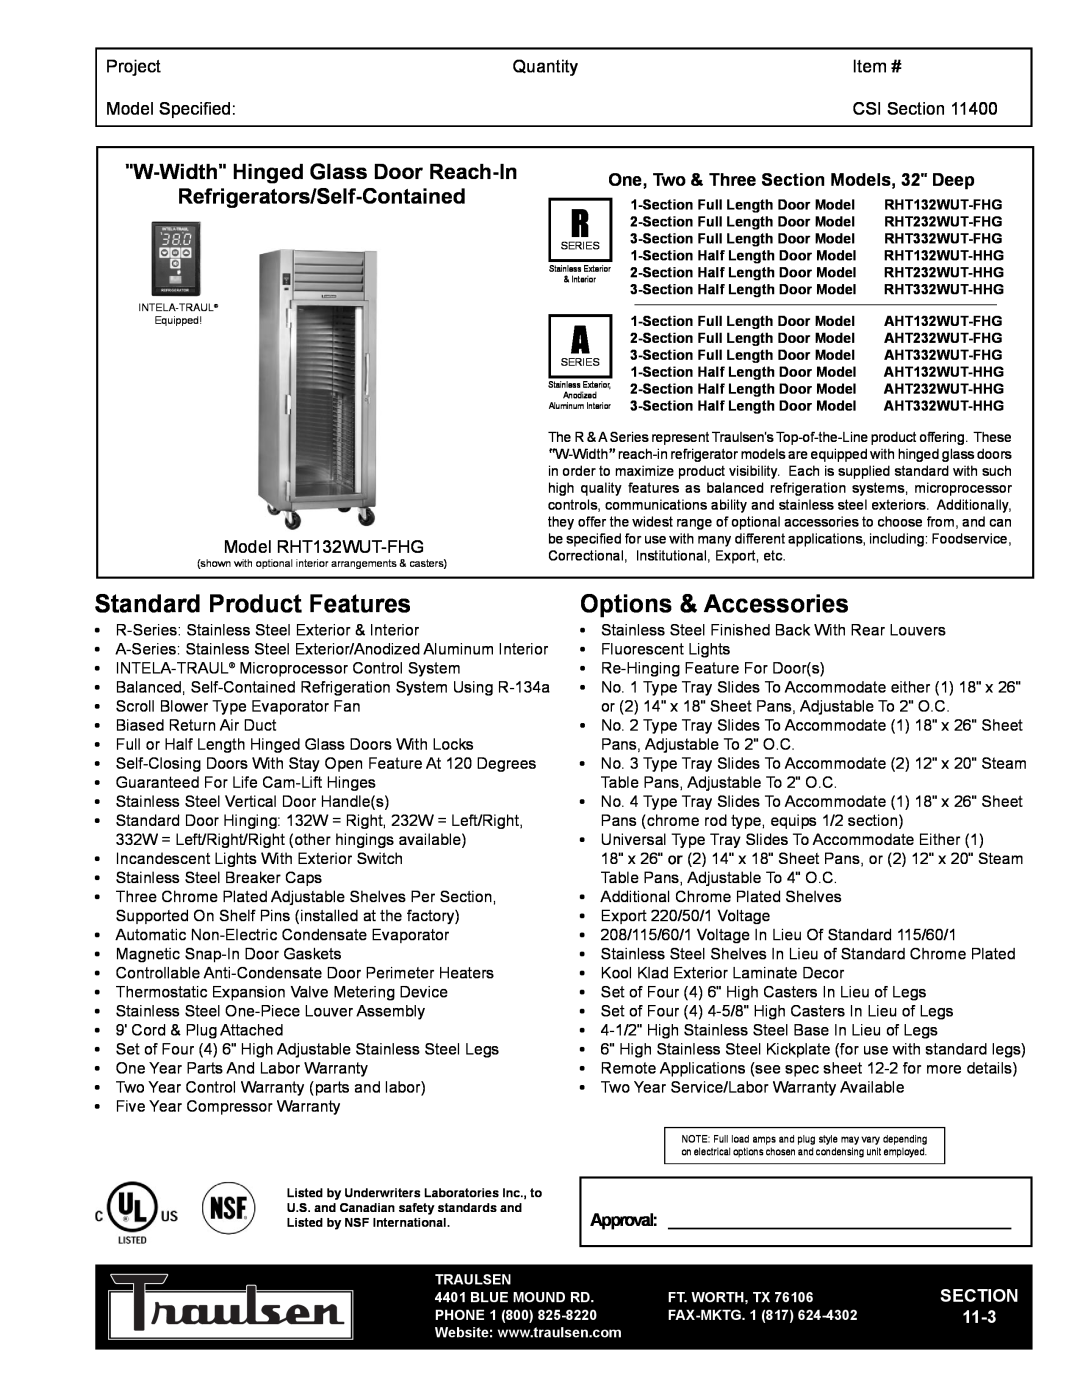 Traulsen TR35827 warranty W-Width Hinged Glass Door Reach-In, Refrigerators/Self-Contained, Project, Quantity, Item # 